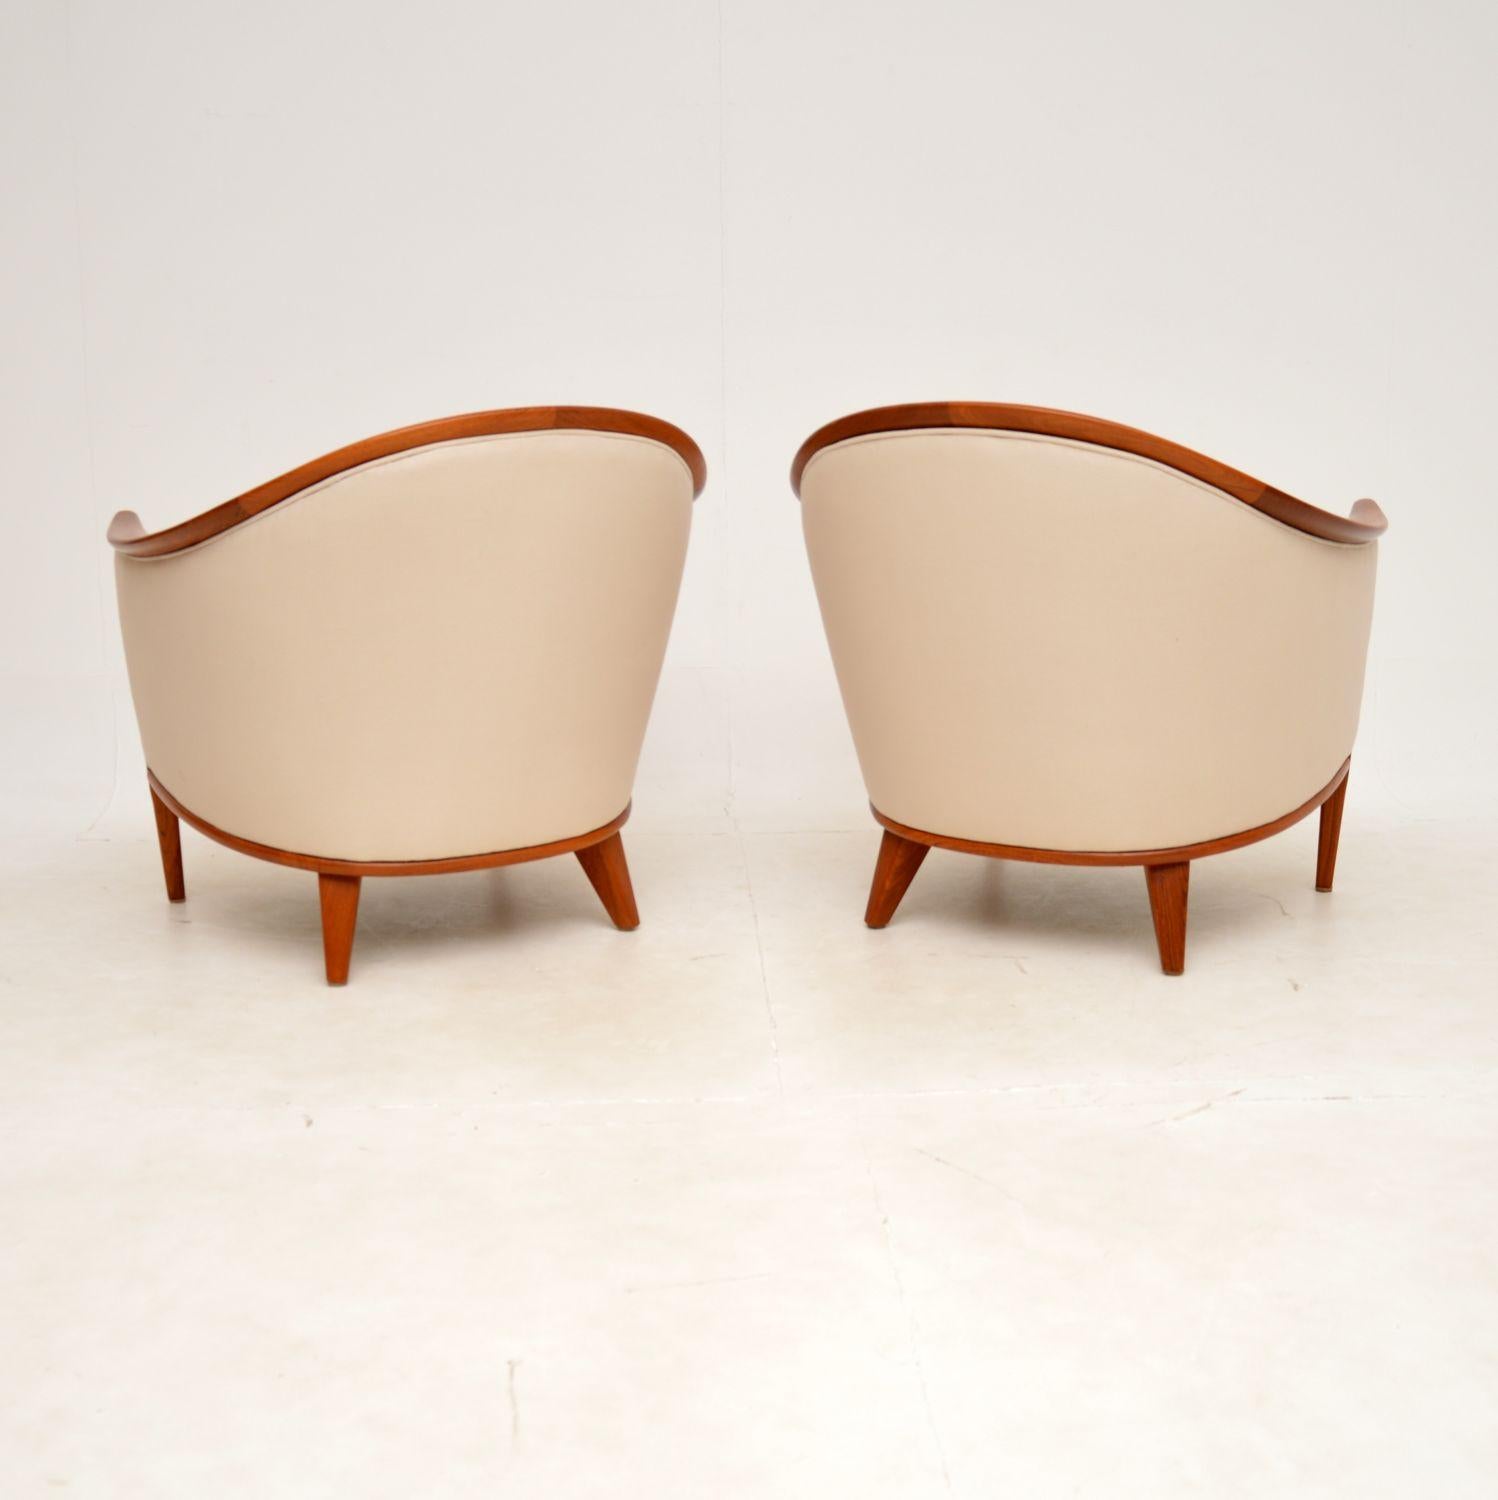 1960s Pair of Swedish Teak Vintage Armchairs by Bertil Fridhagen In Good Condition For Sale In London, GB